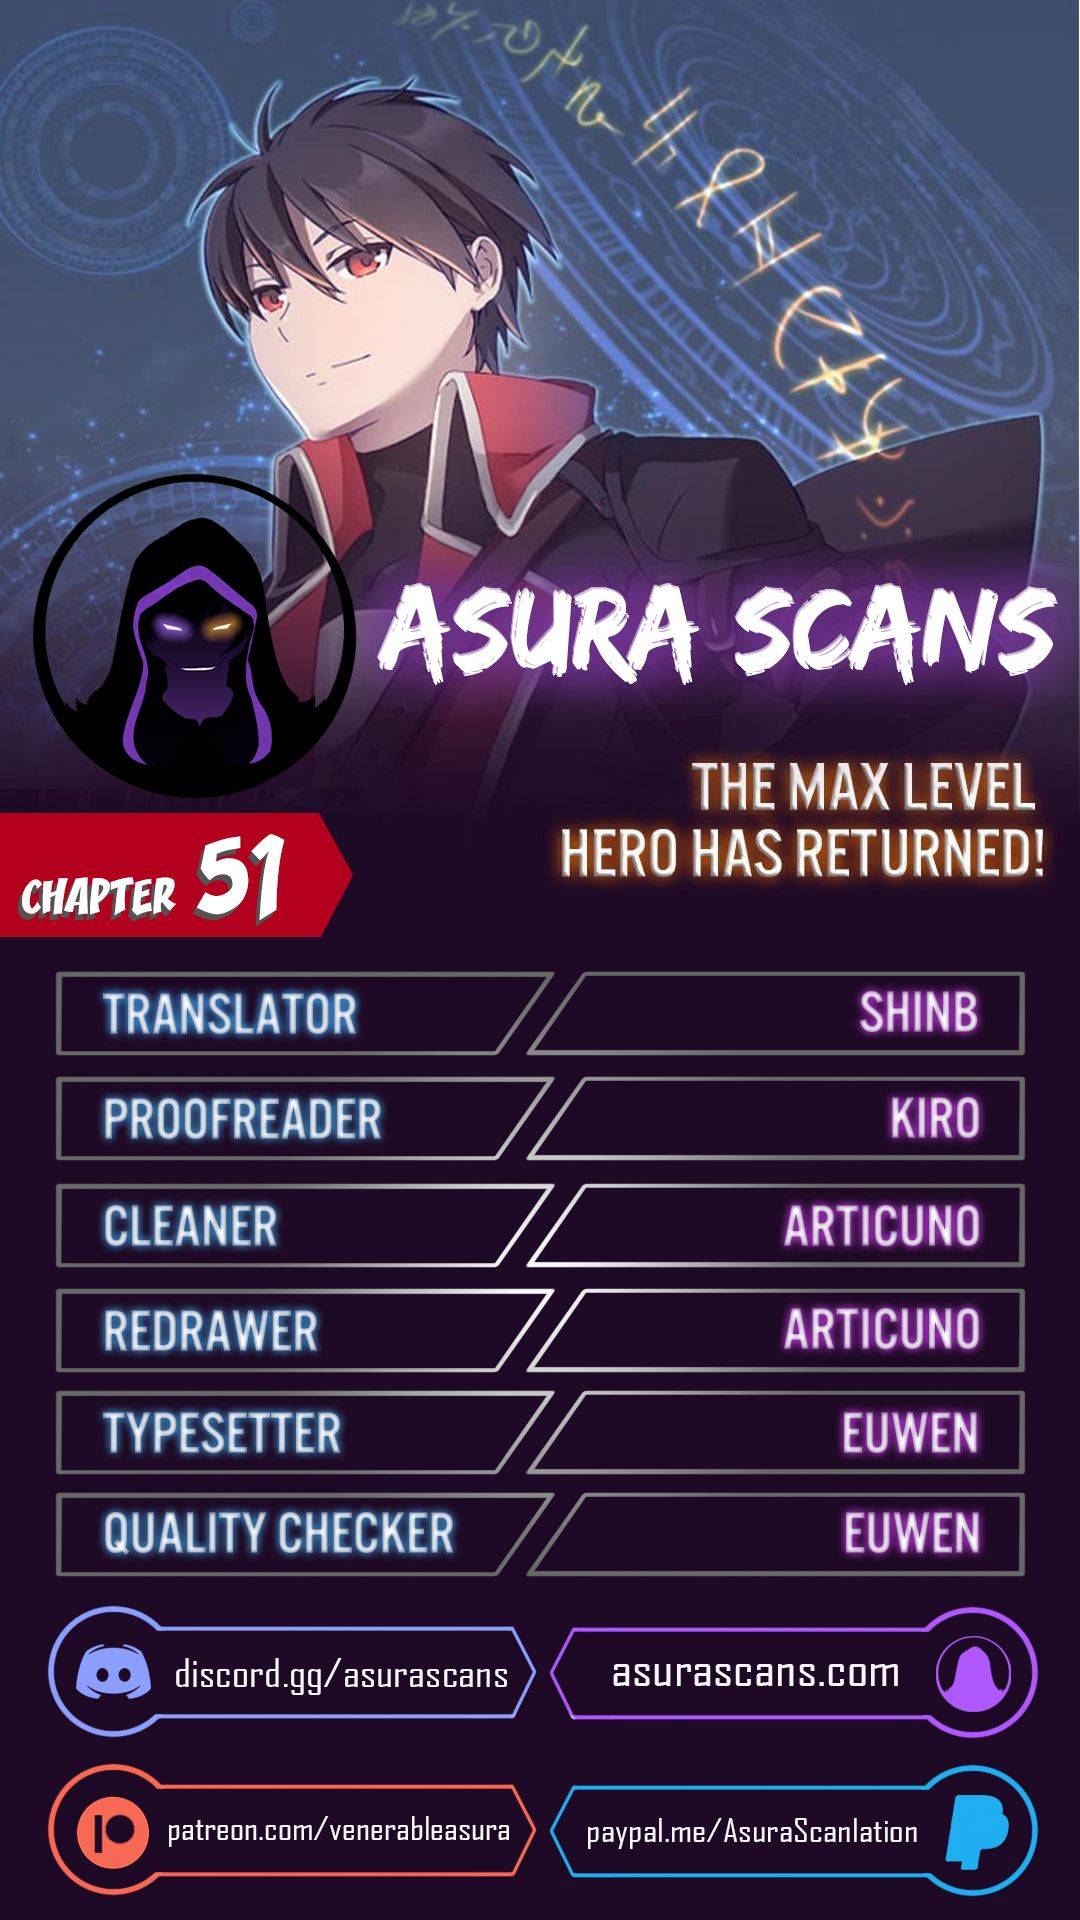 The MAX leveled hero will return! Chapter 51